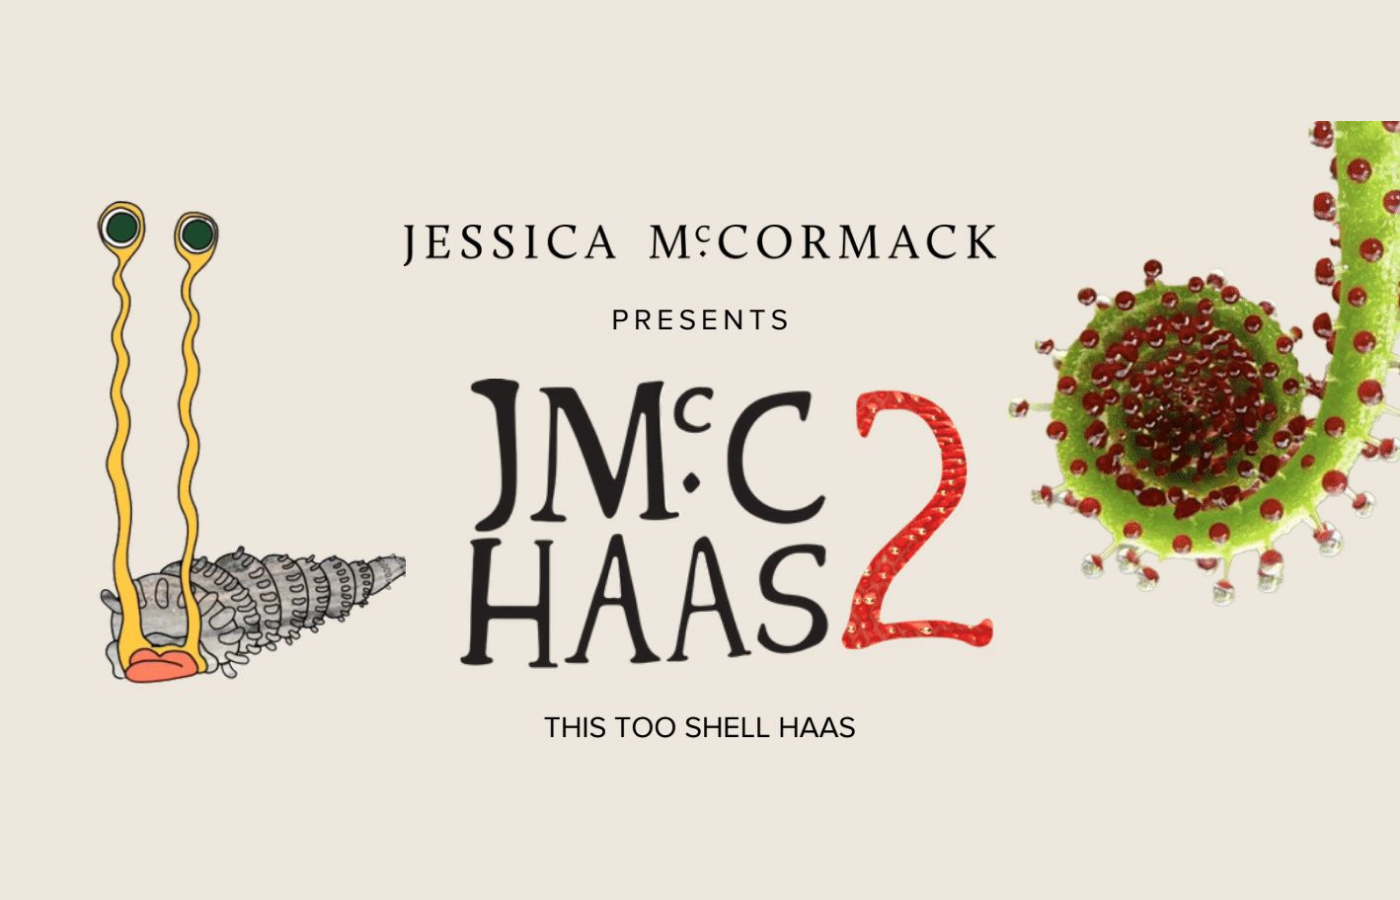 This Too Shell Haas by Jessica McCormack